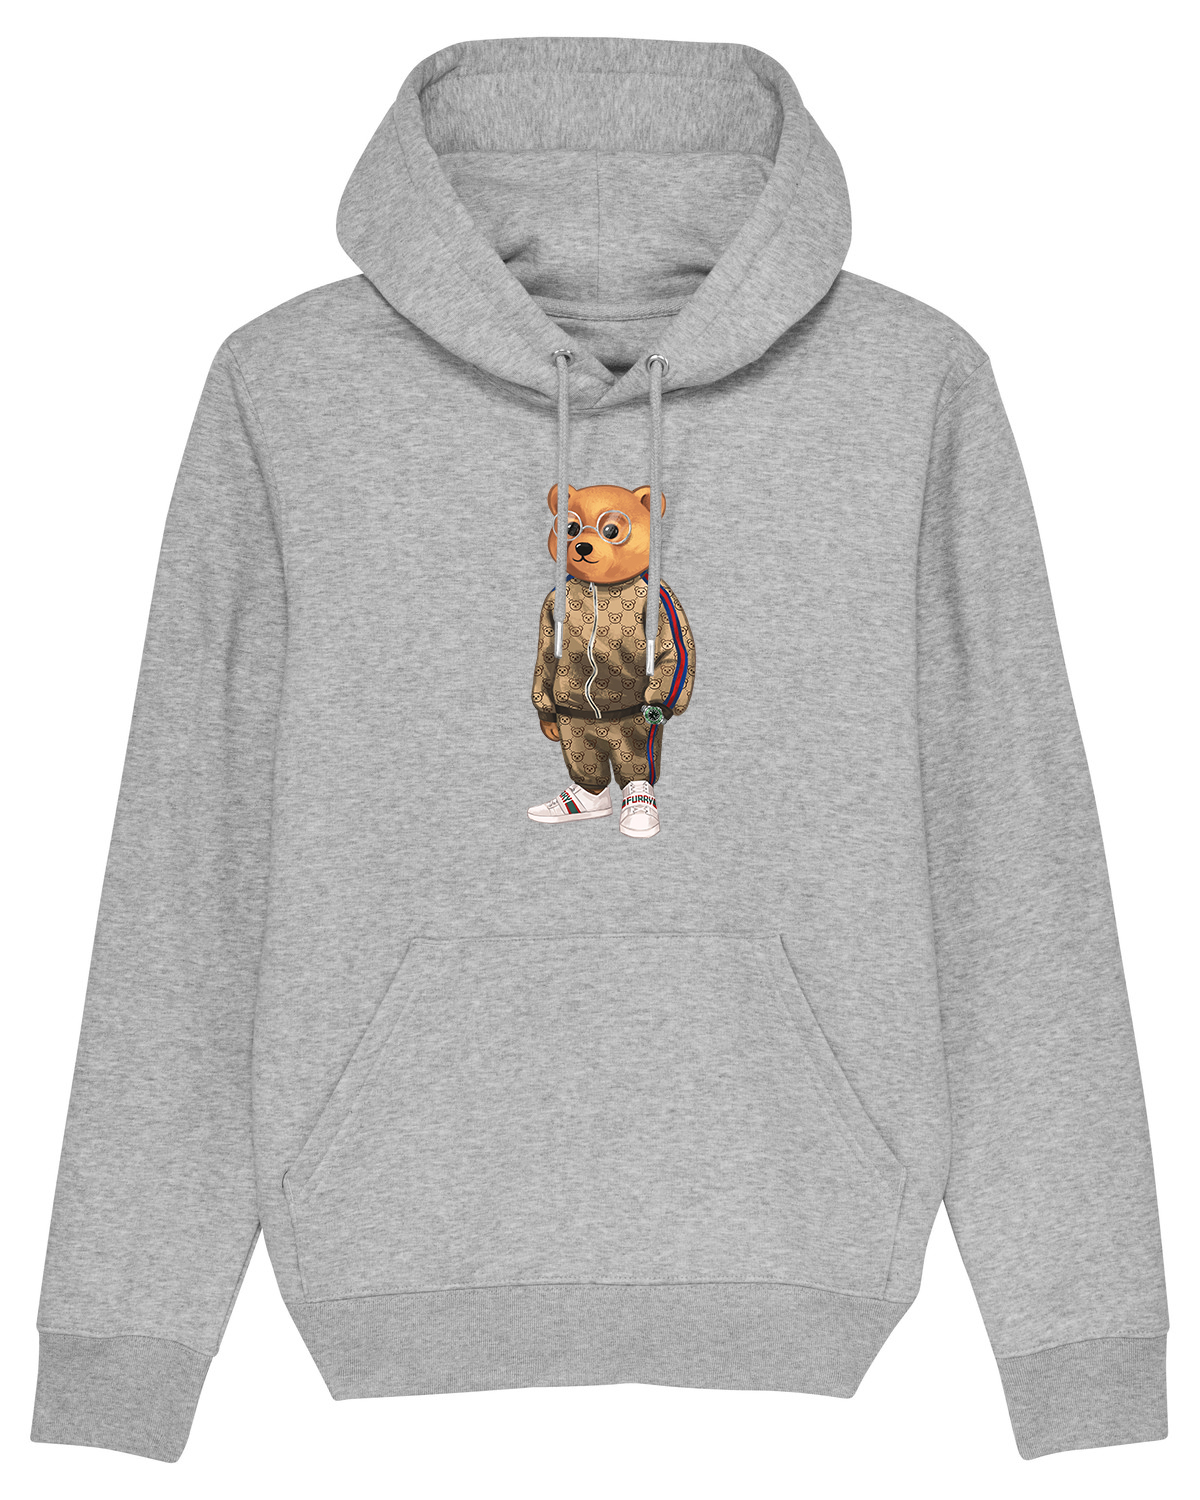 Eco-Friendly Hipster Bear Pullover